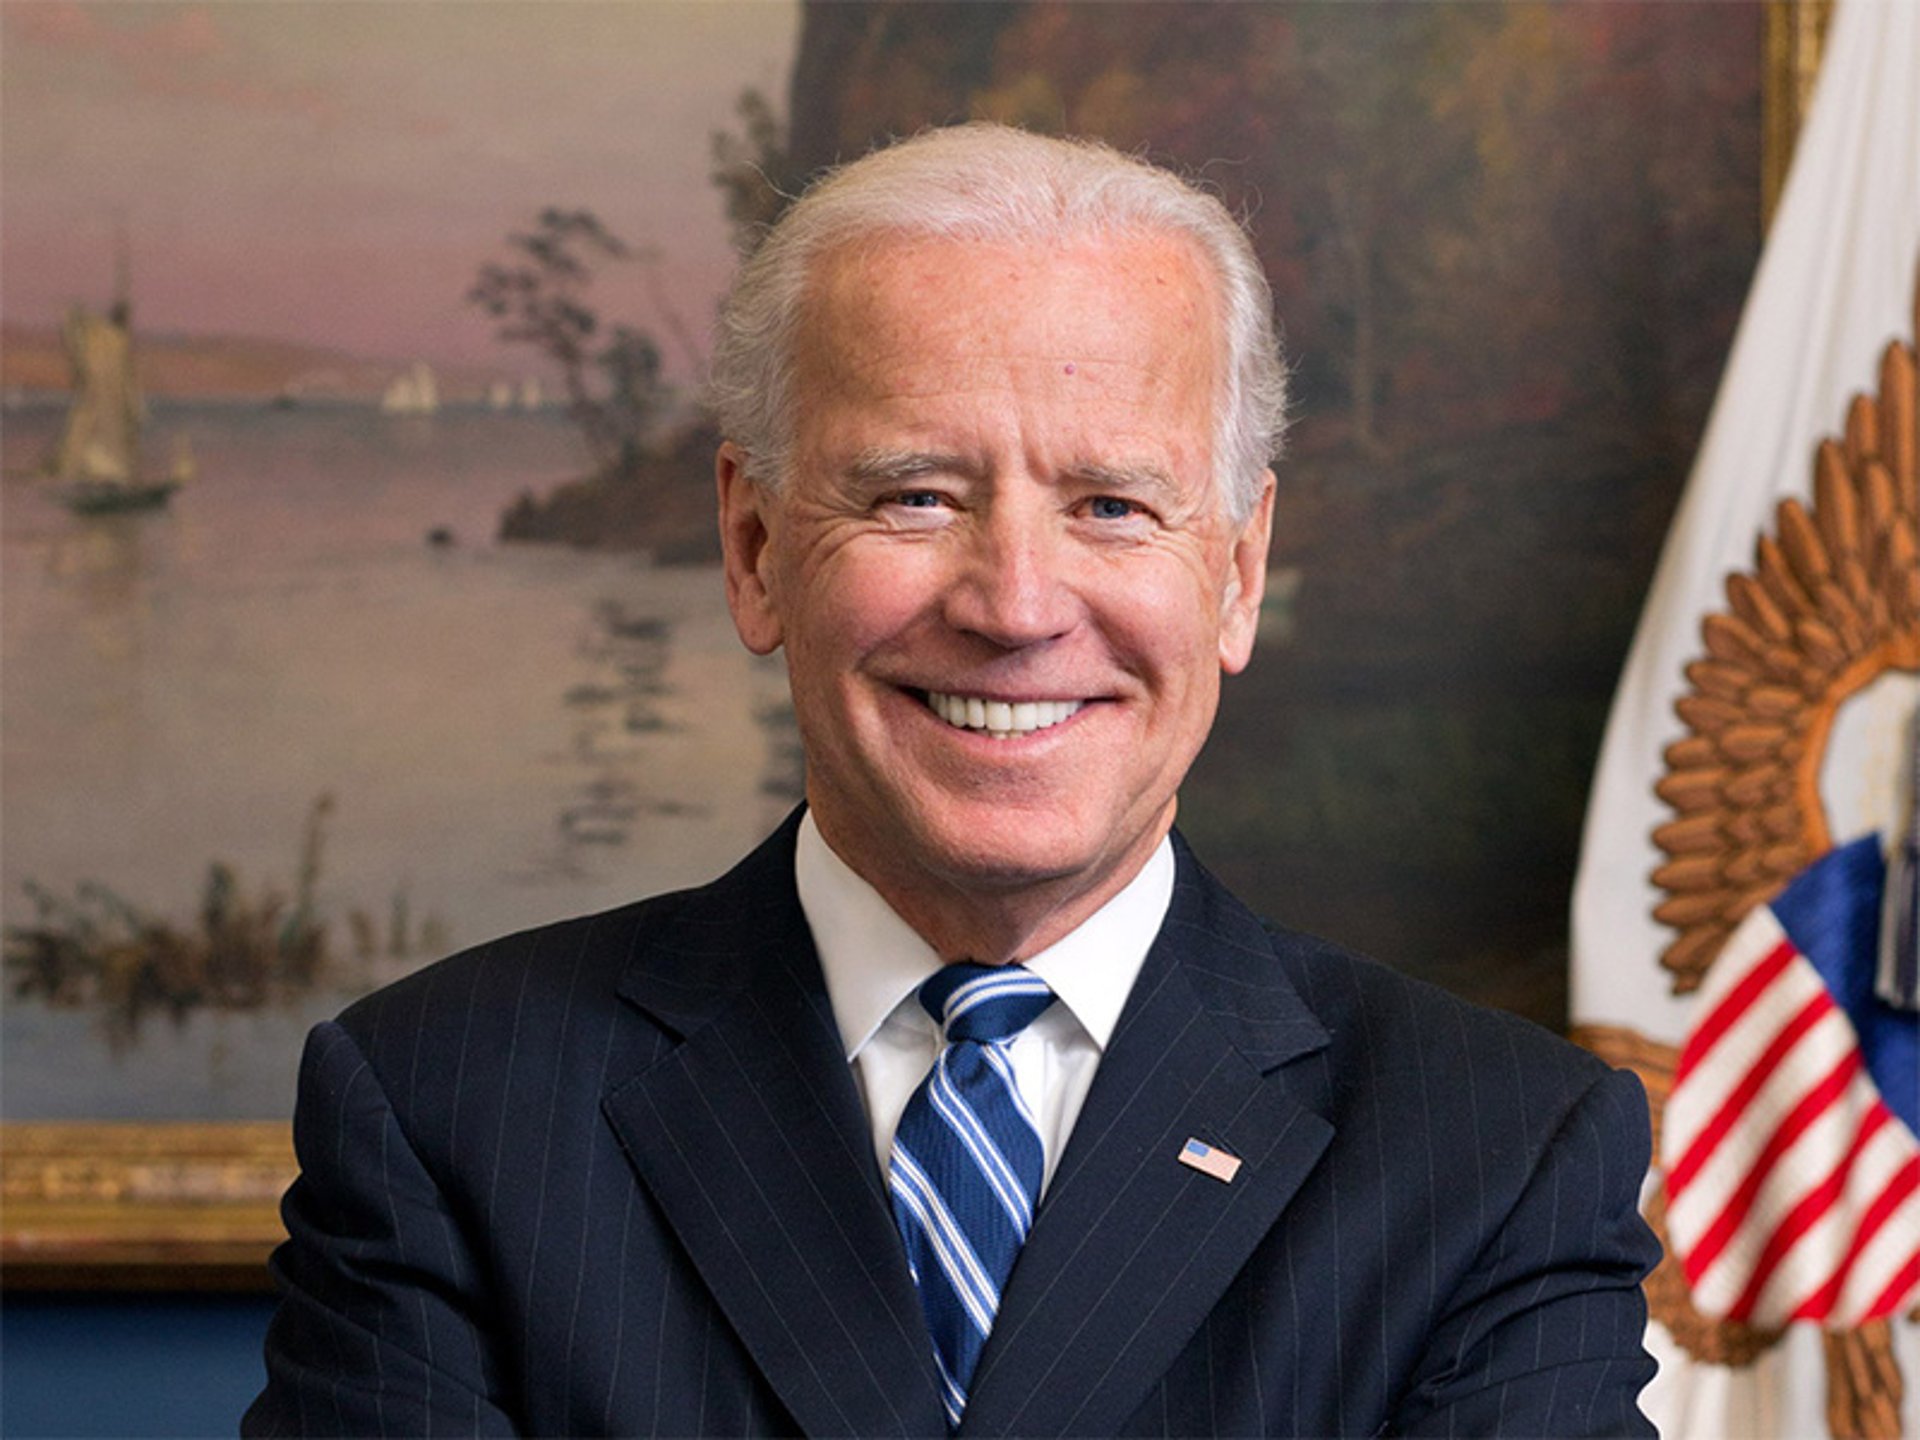 COVID Cases Could Double by Biden's Inauguration: Study thumbnail